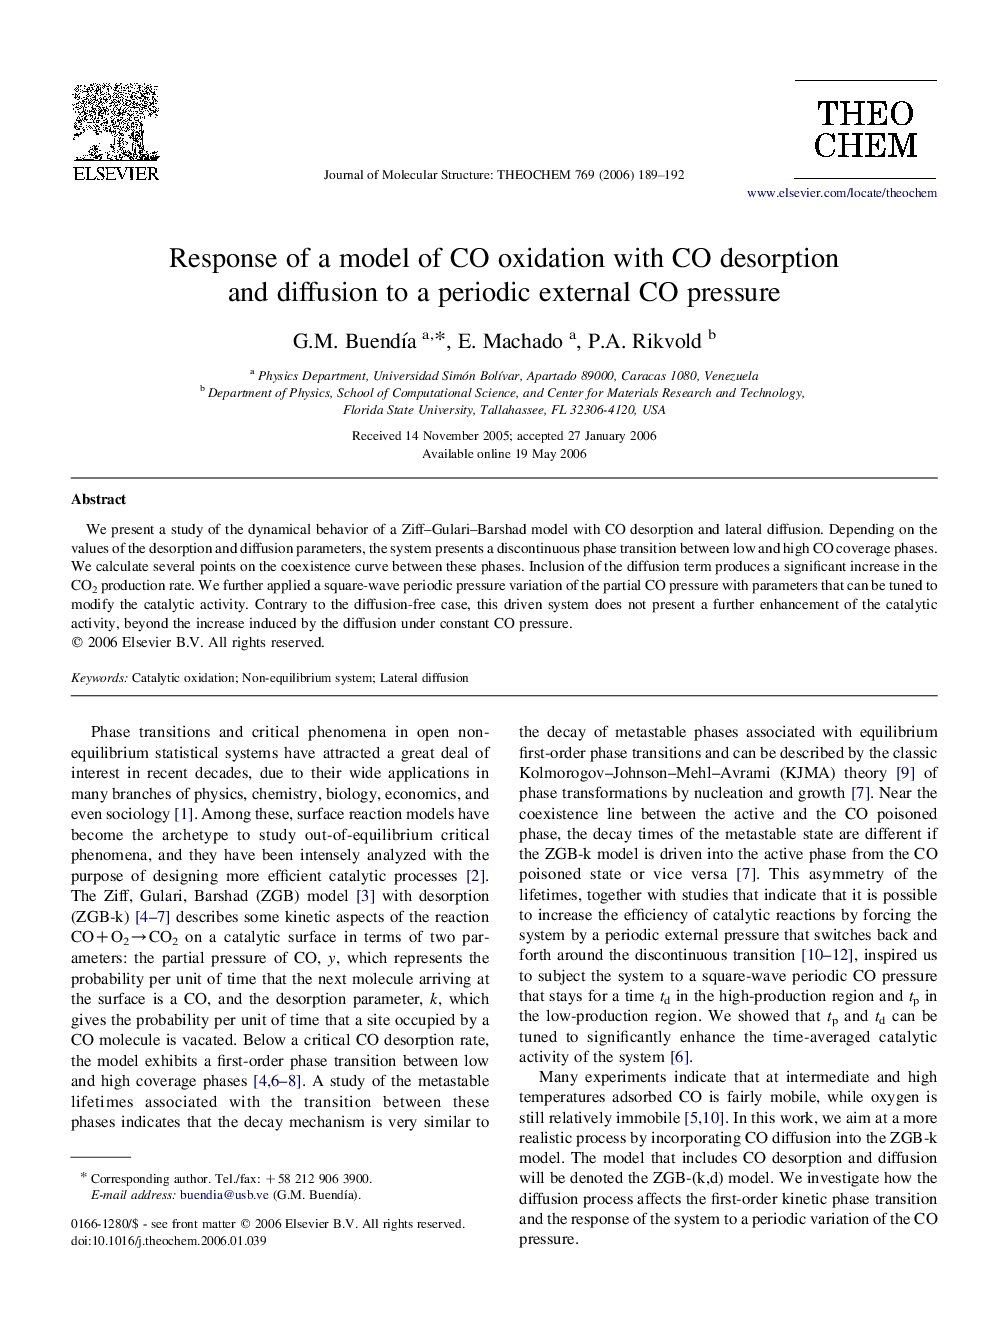 Response of a model of CO oxidation with CO desorption and diffusion to a periodic external CO pressure